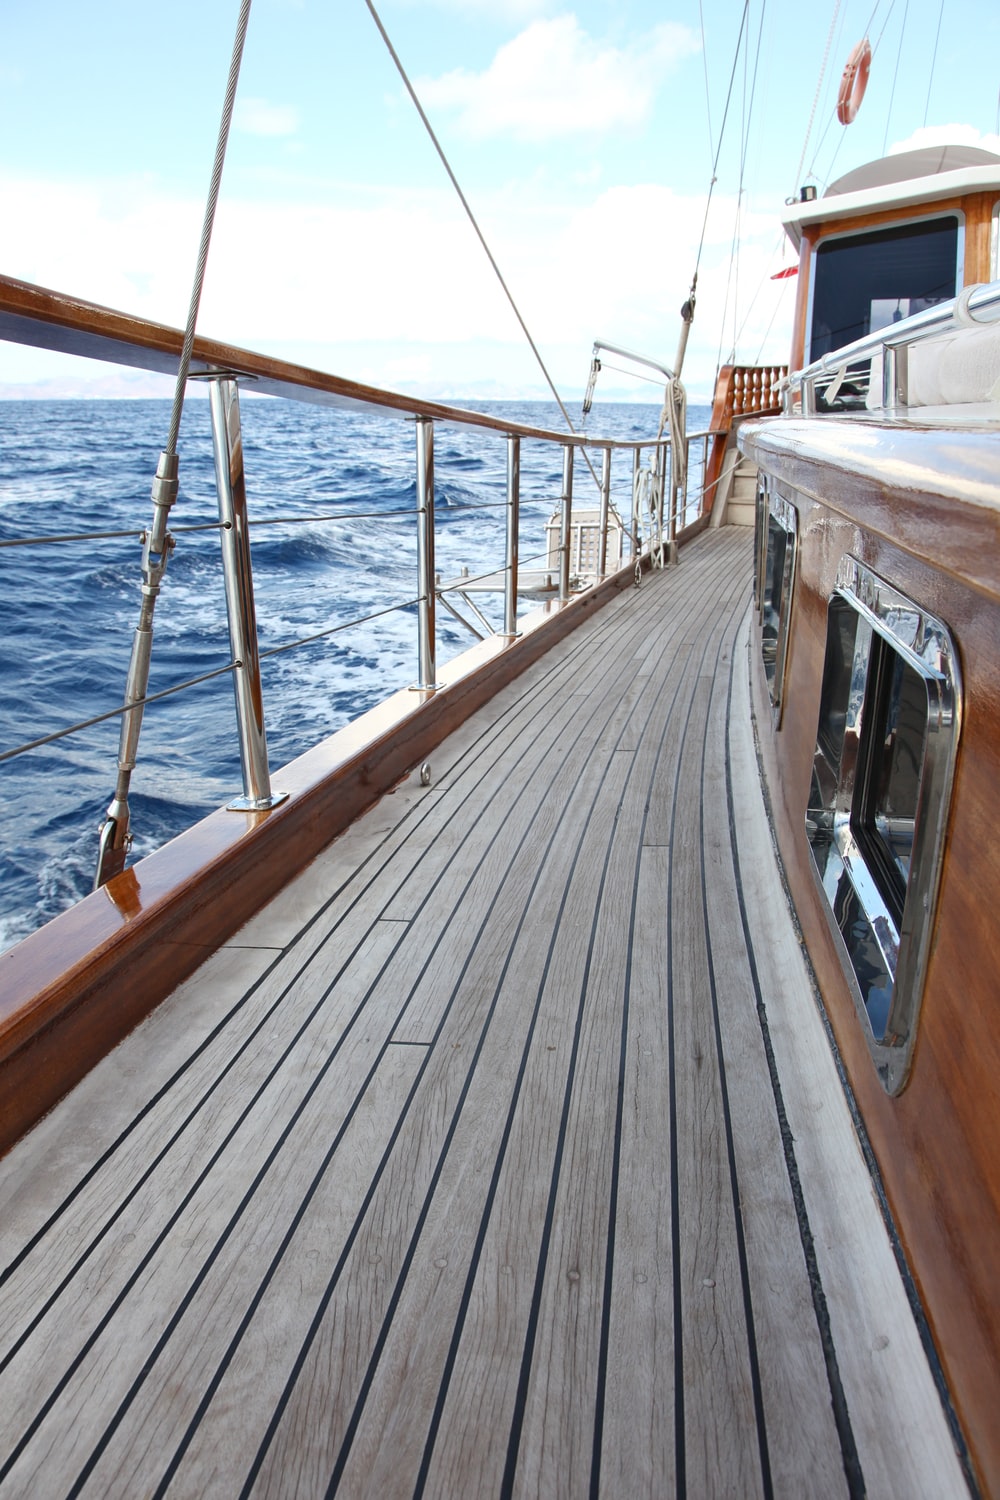 Boat Deck Picture. Download Free Image